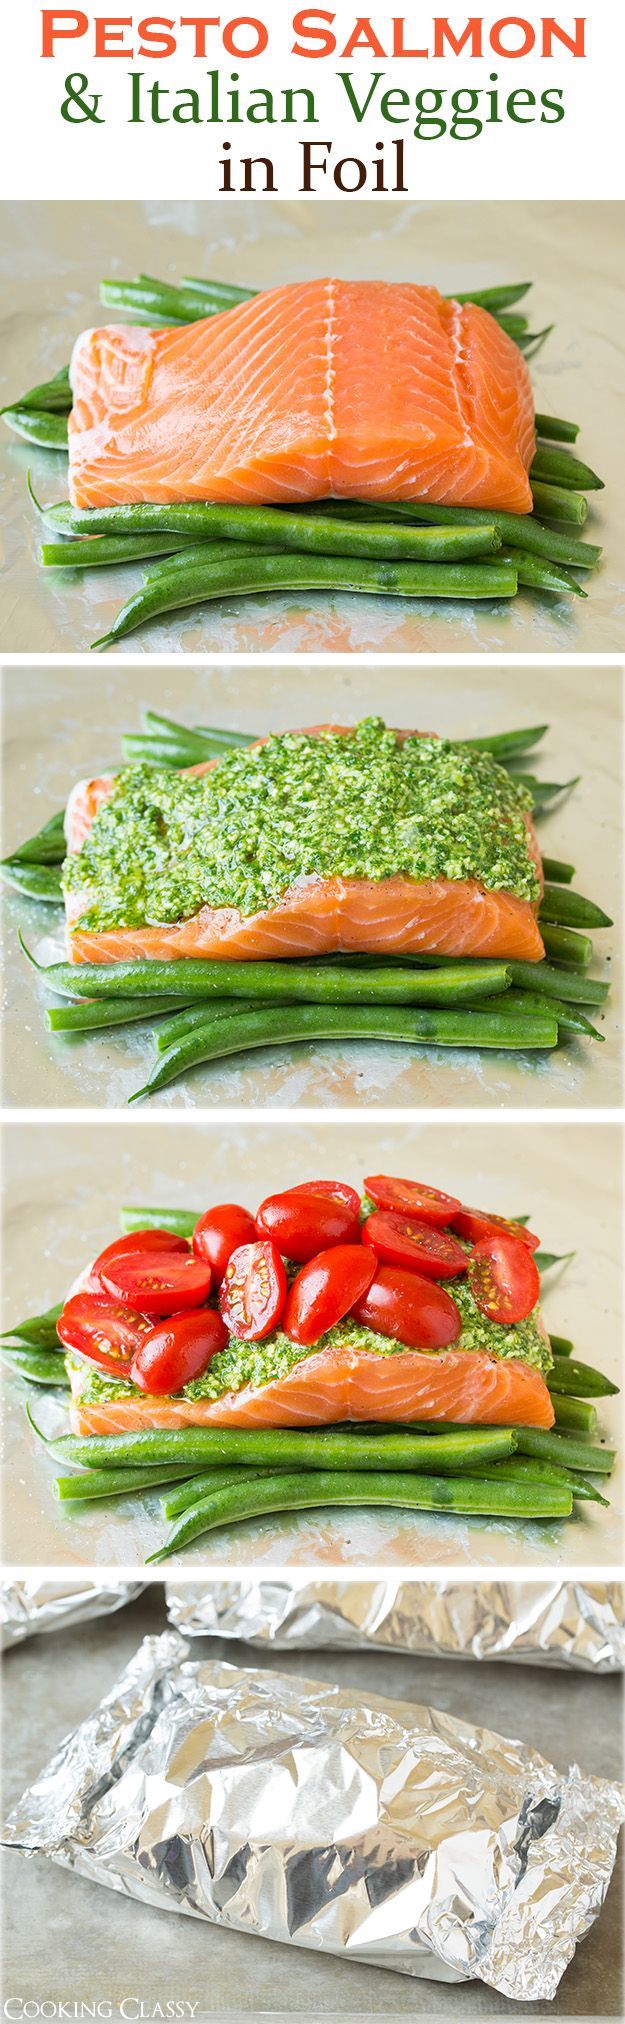 Pesto Salmon and Italian Veggies in Foil – this is an easy, flavorful dinner that is sure to please! So delicious!